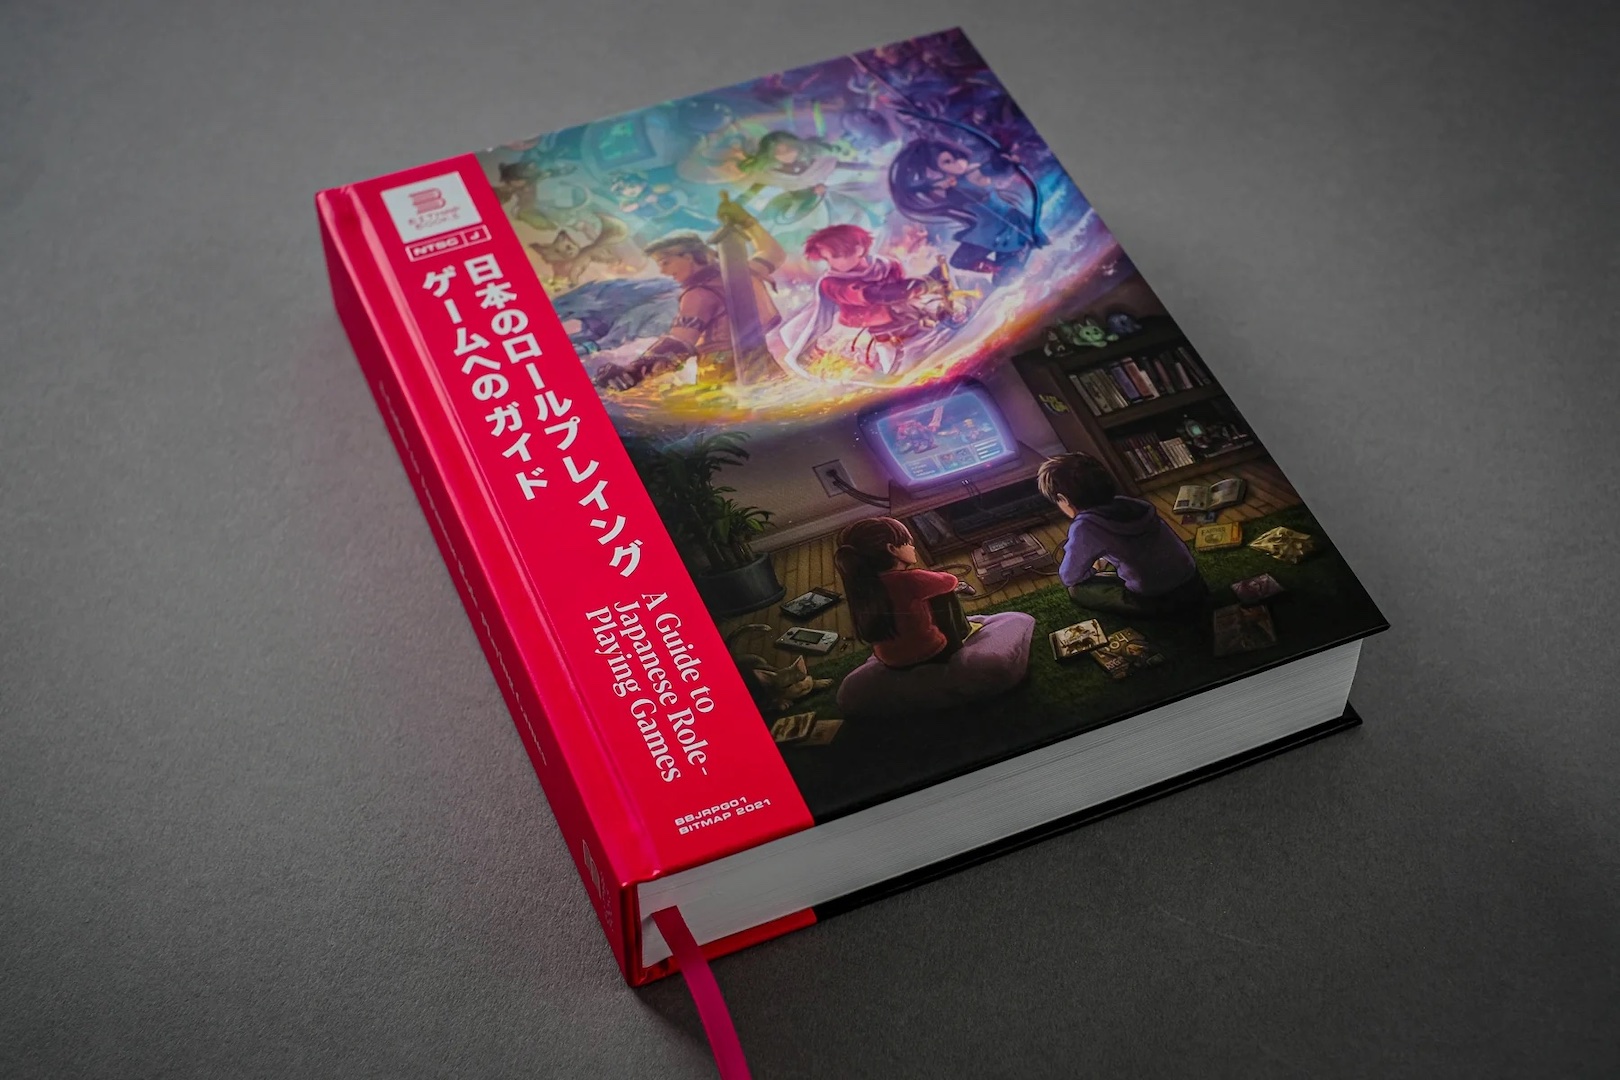 Bitmap Books: A Guide to Japanese Role-Playing Games #01